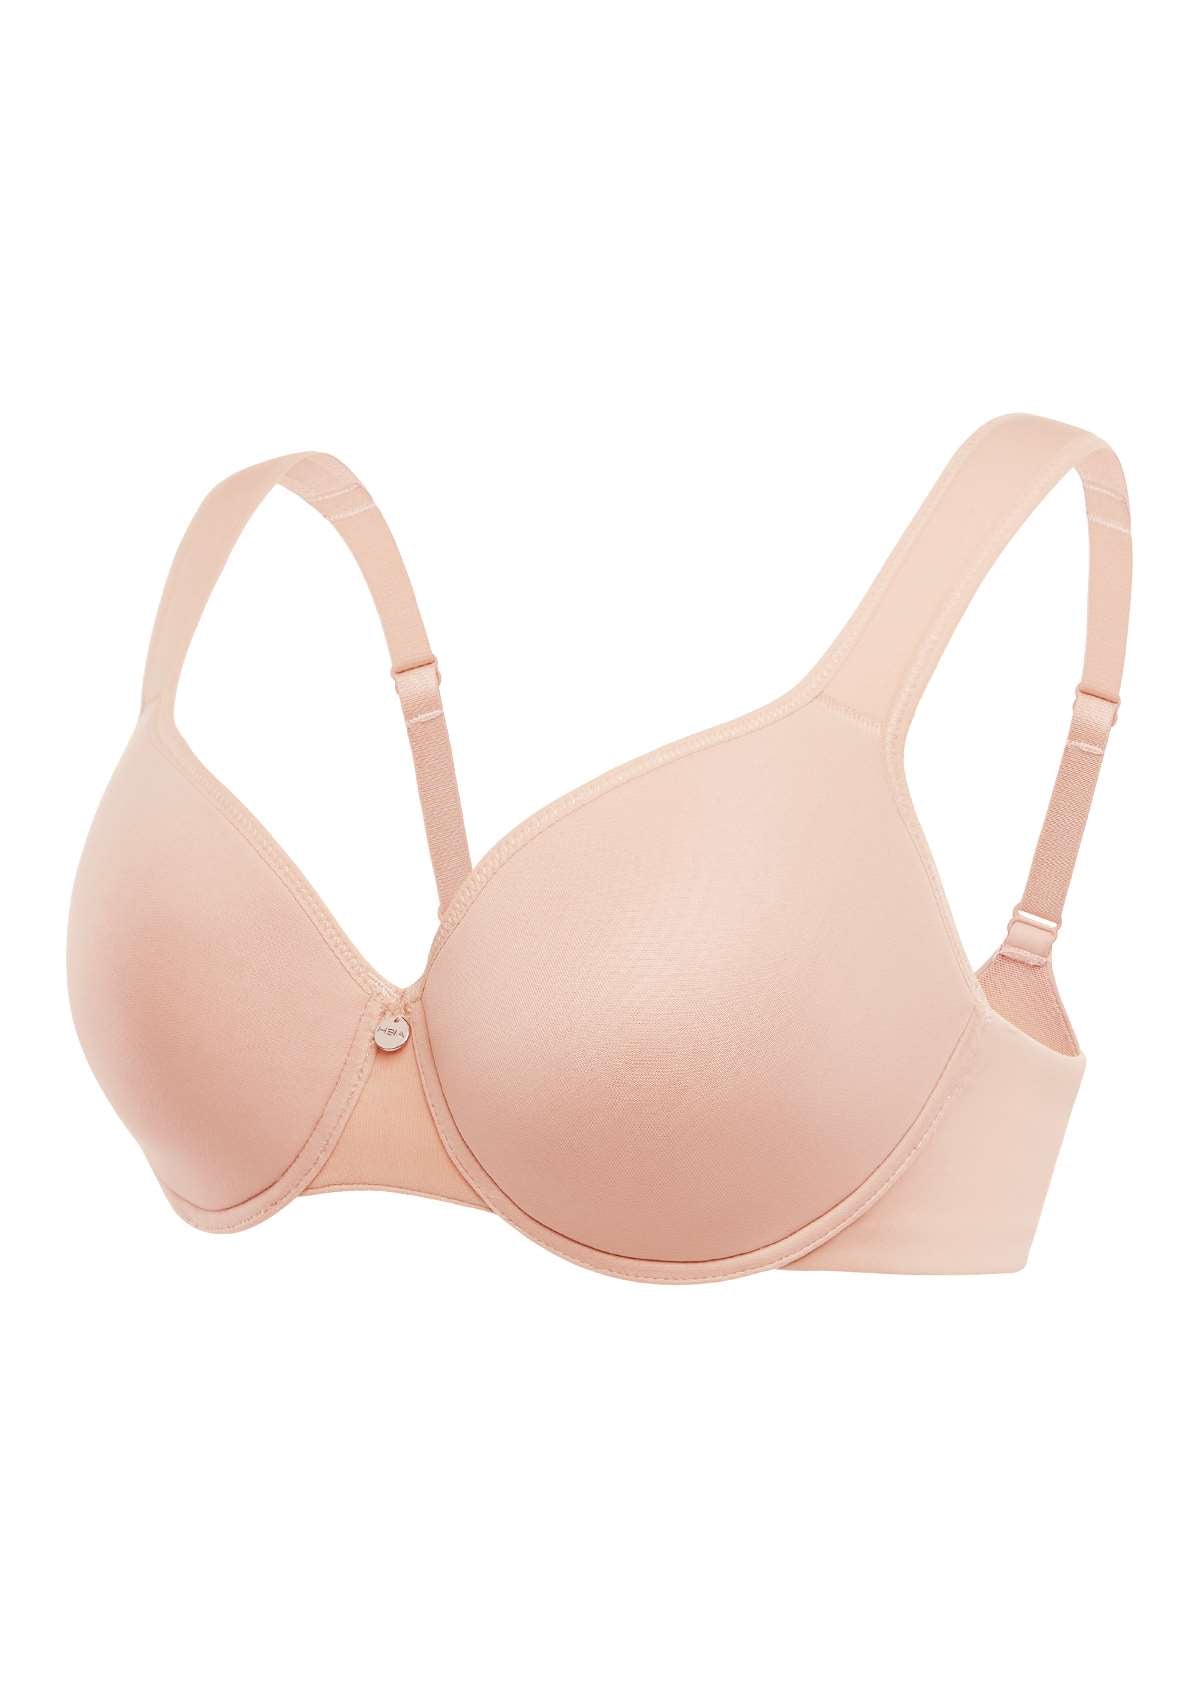 HSIA Patricia Smooth Classic T-shirt Lightly Padded Minimizer Bra - Light Pink / 38 / D